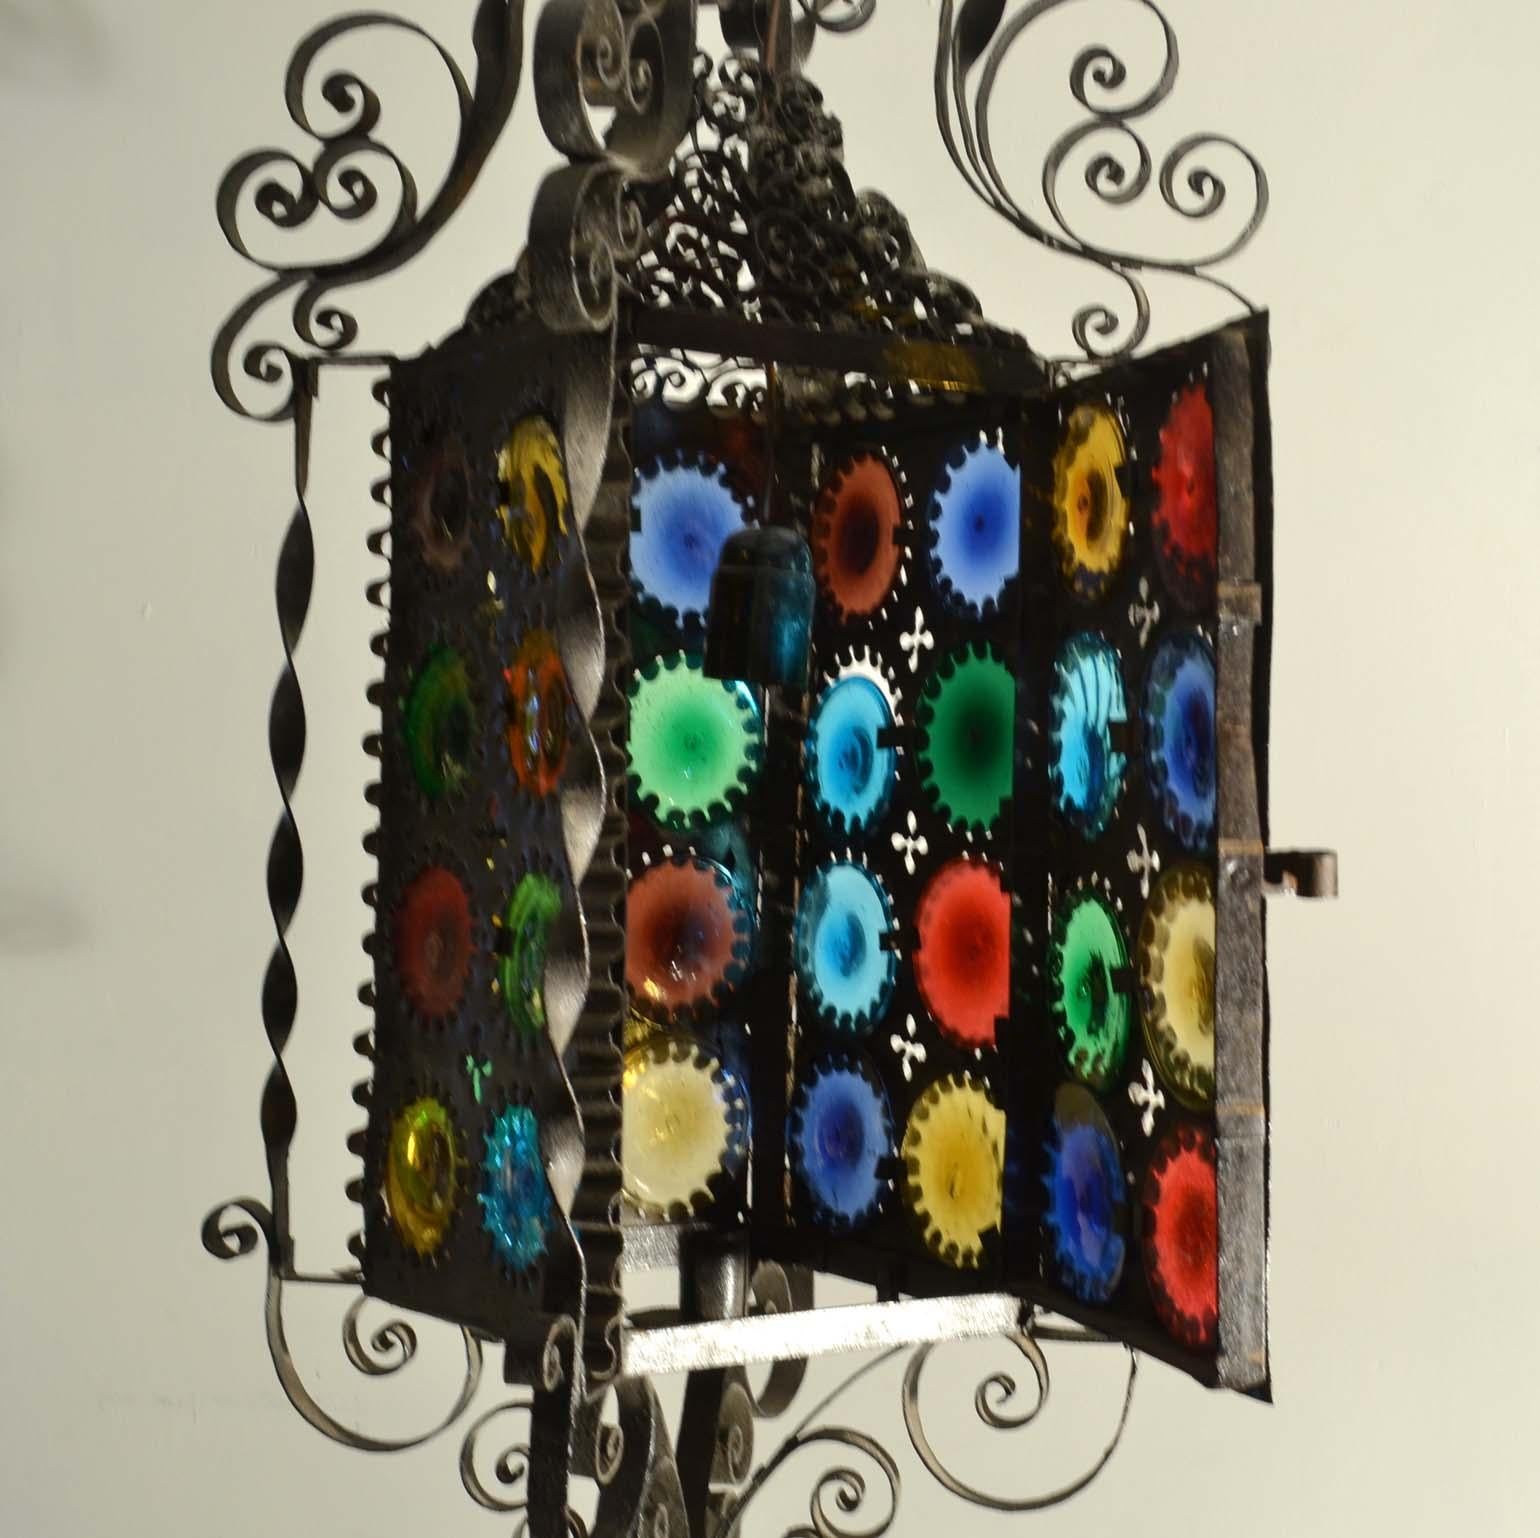 Hand-Crafted 20th Century Venetian Wrought Iron Lantern with Colored Glass Disks